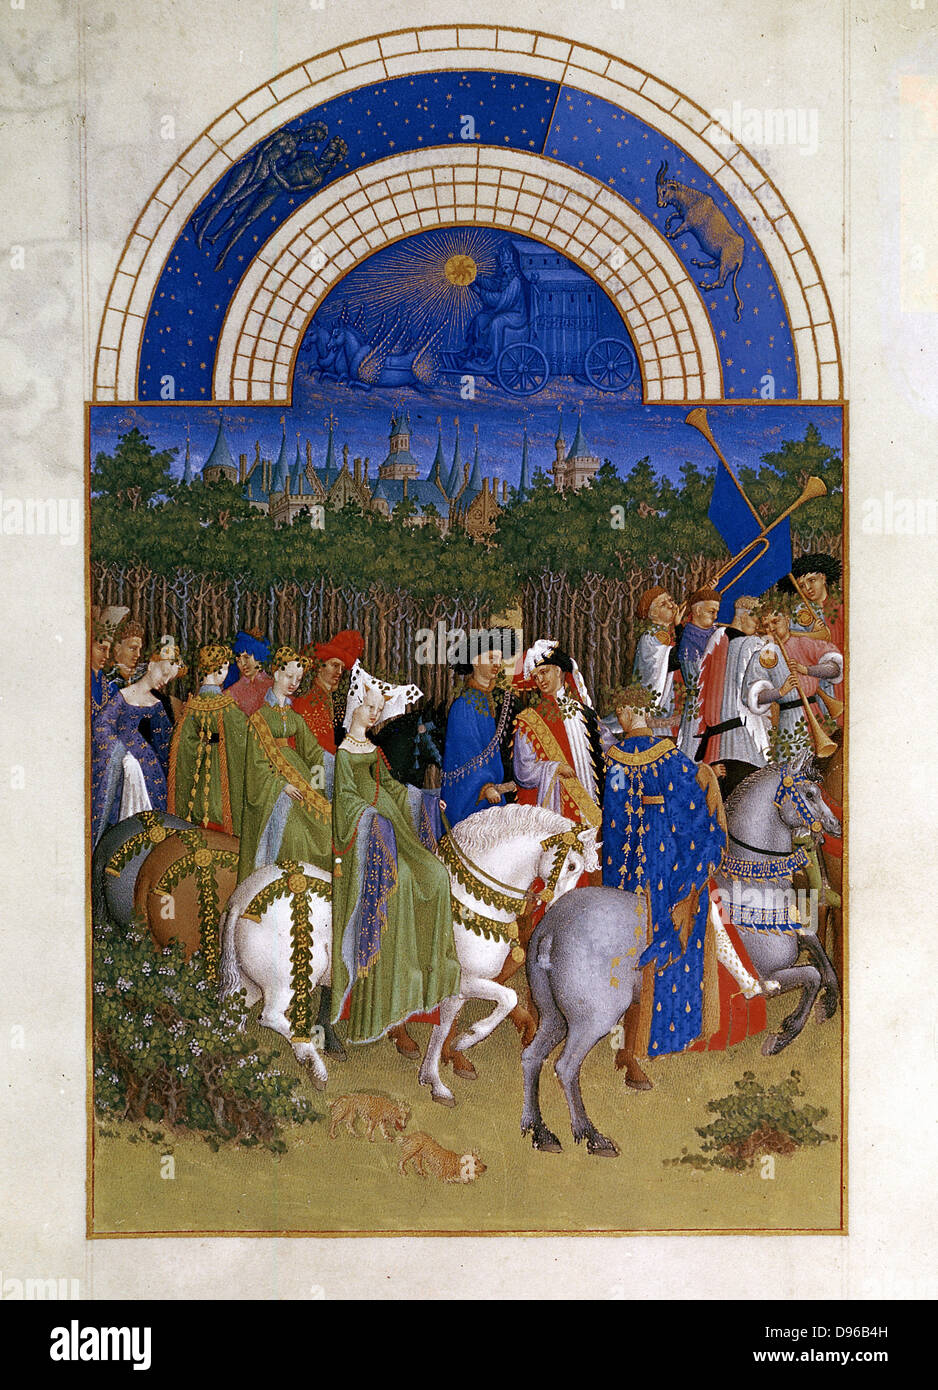 May: Lords and ladies, mounted, progressing along road by woods, preceded by trumpeters. At top are two zodiacal signs for May, Taurus and Gemini. From 'Tres Riches Heures du Duc de Berry'. Book of hours by Limbourg brothers pre-1416. Musee Condee, Chantilly. Stock Photo